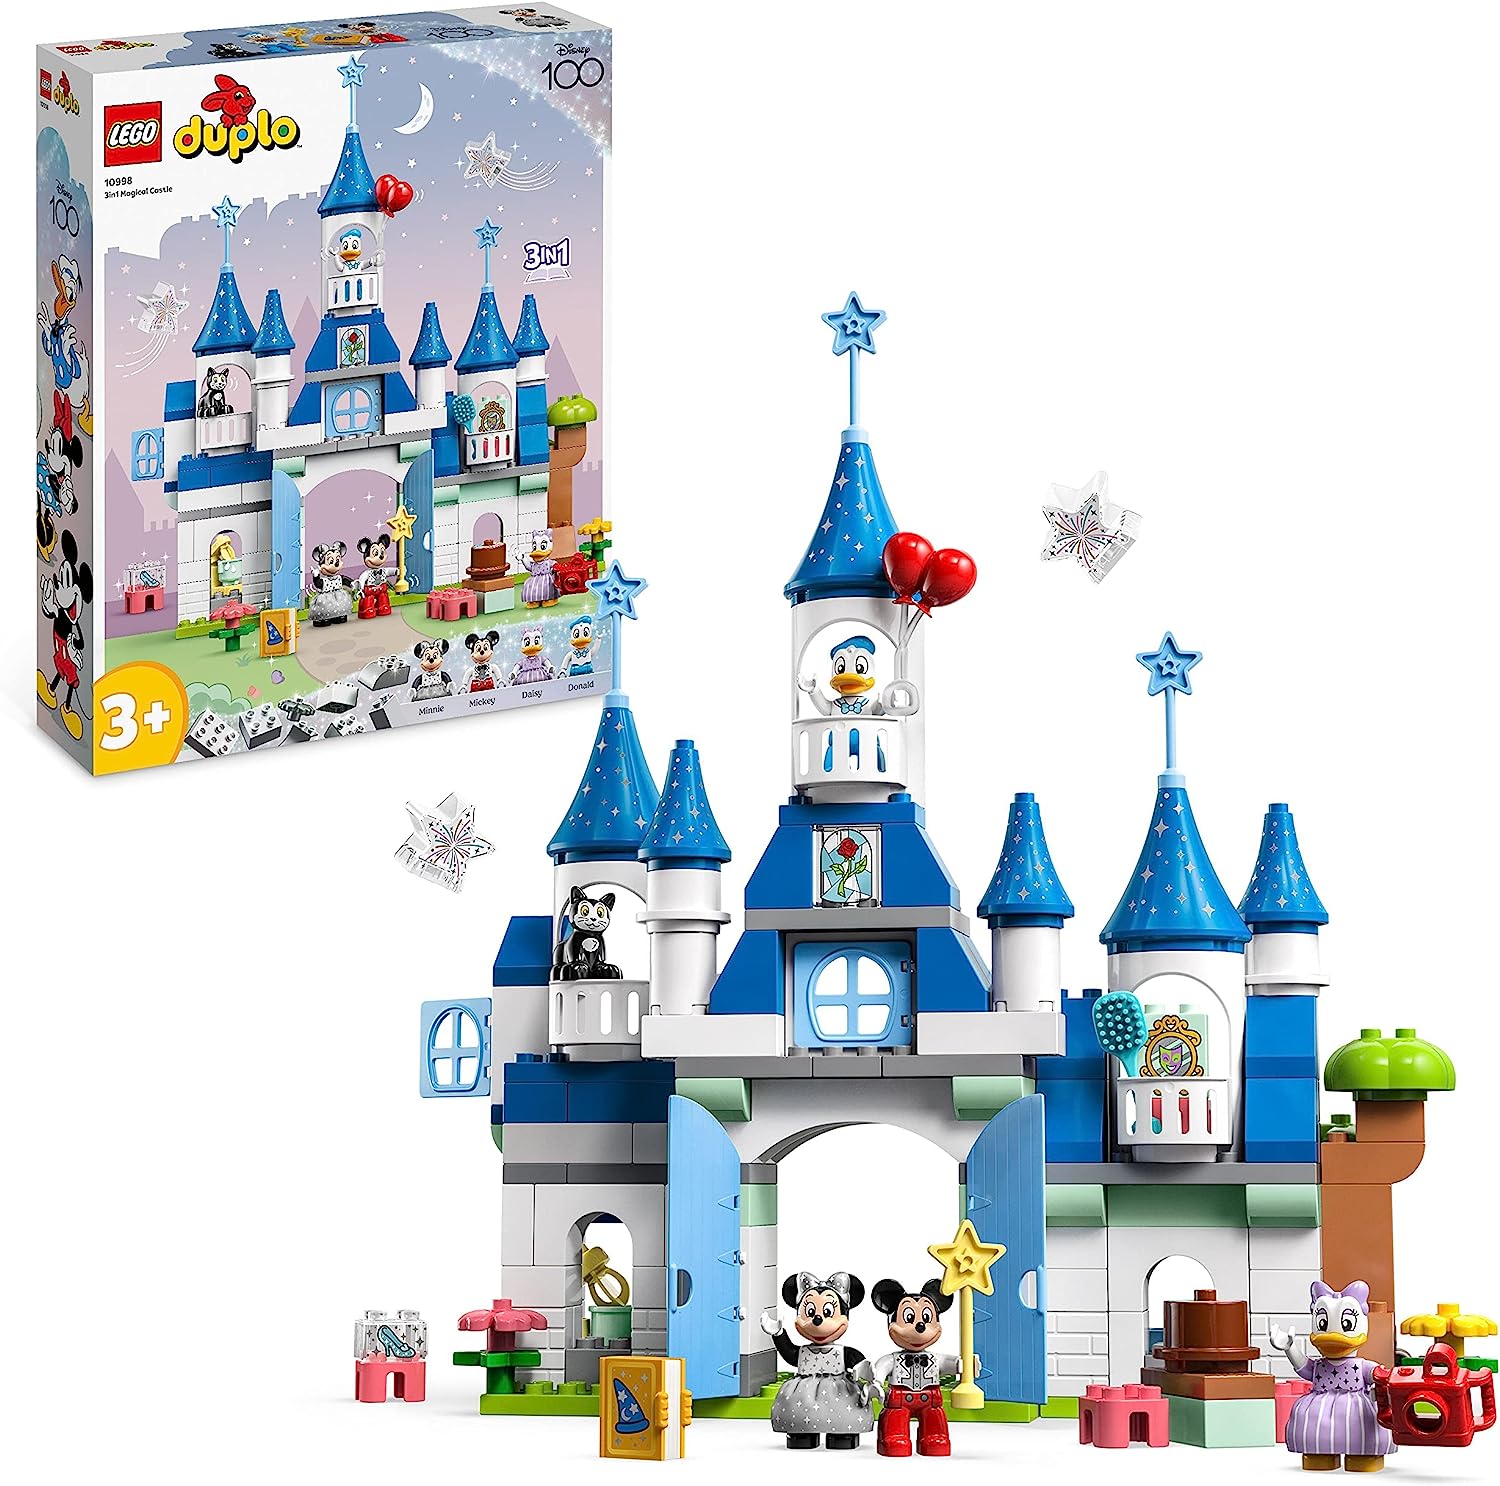 LEGO 10998 Duplo Disney 3in1 magic lock, construction toy with Micky Maus, Minnie, Donald Duck and Daisy figures, for toddlers and children from 3 years, Disney \ 's 100th anniversary set